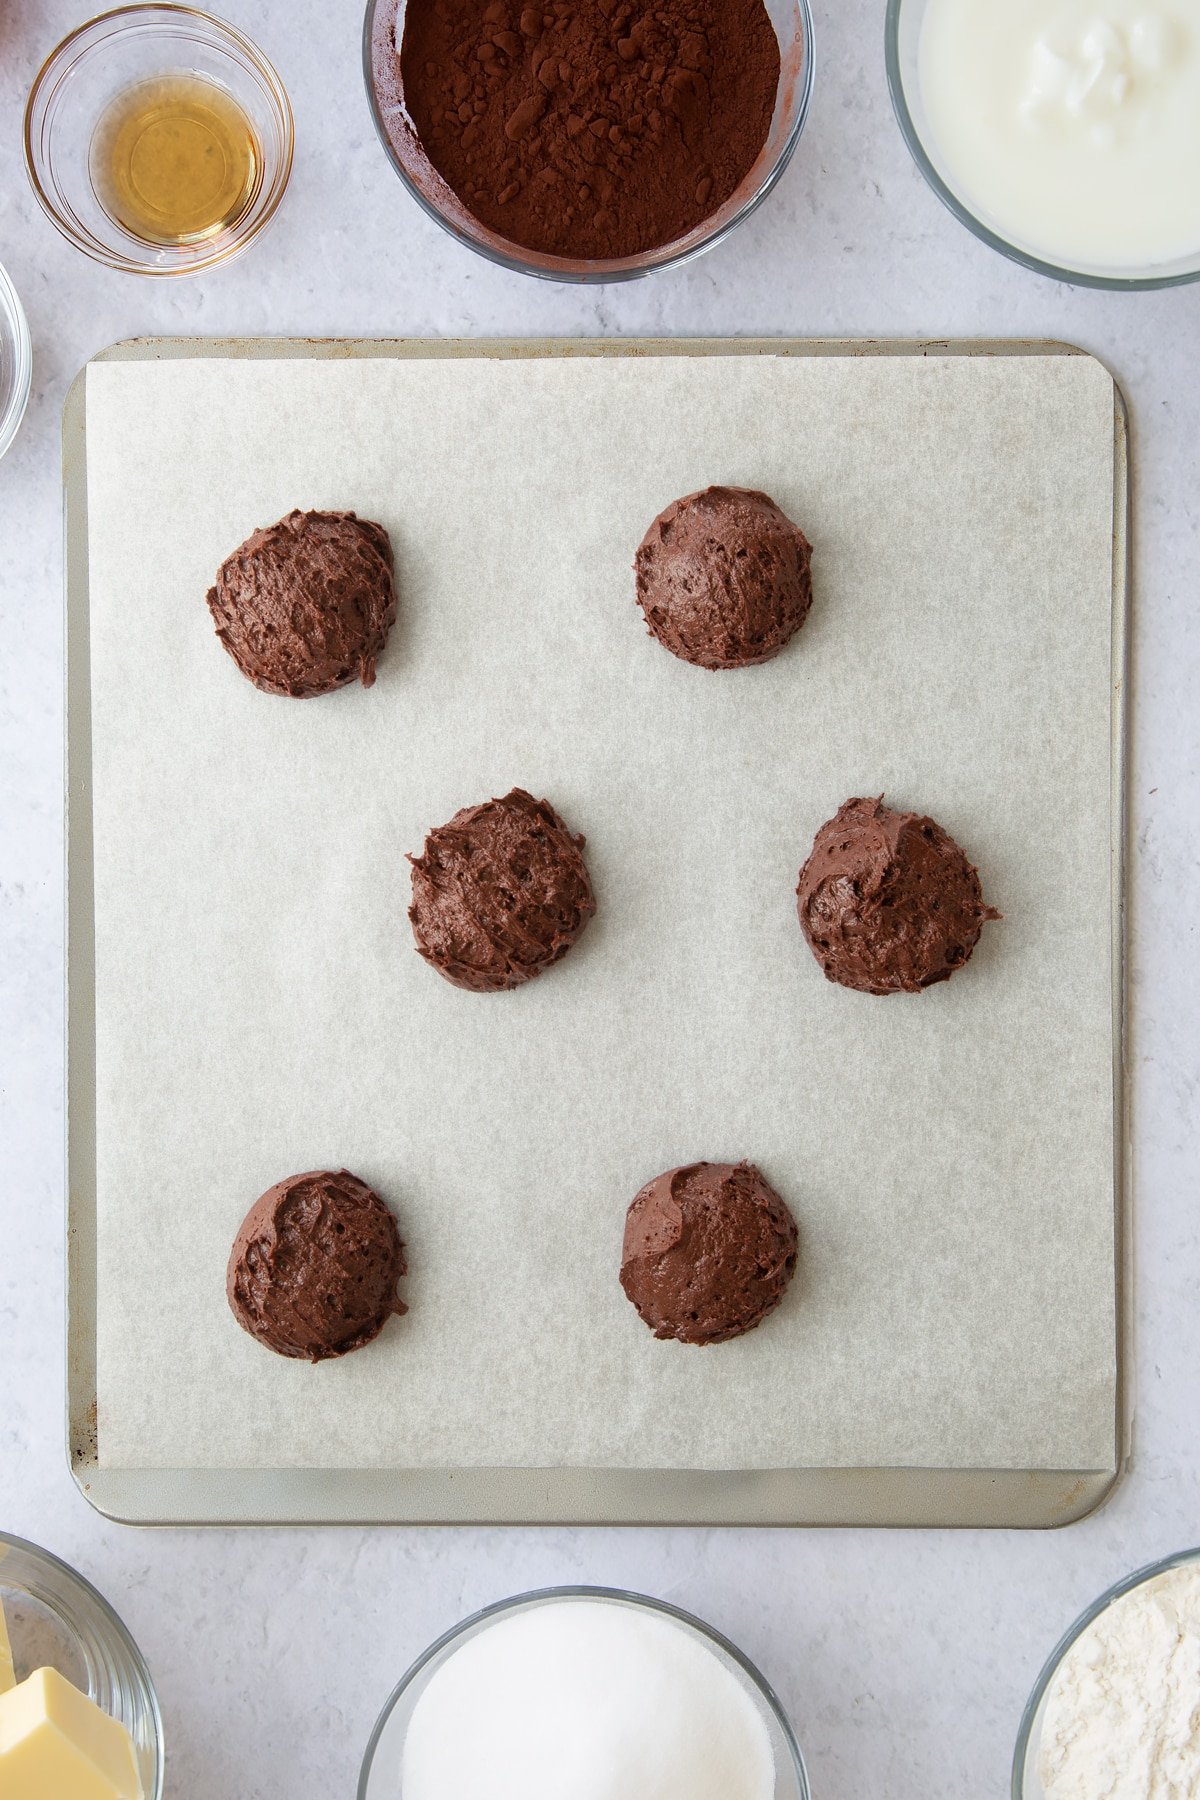 6 small balls of chocolate whoopie batter on a parchment lined baking tray.